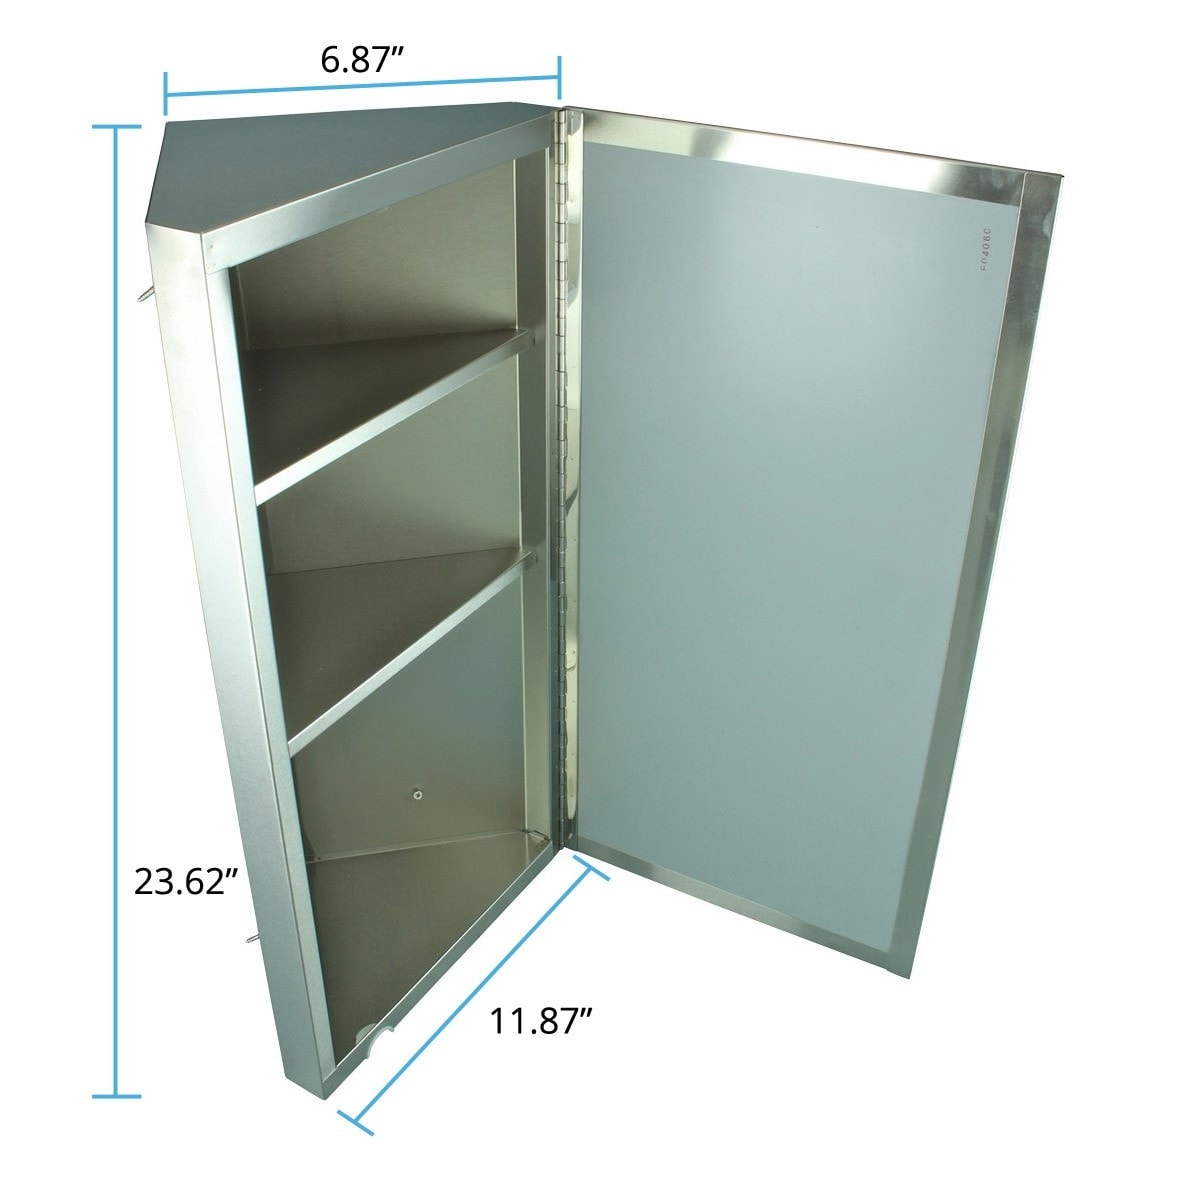 https://ak1.ostkcdn.com/images/products/is/images/direct/7a9c73f608c657bba4ac42ee91677fcd107df82e/Renovator%27s-Supply-Brushed-Stainless-Steel-Corner-Medicine-Cabinet.jpg